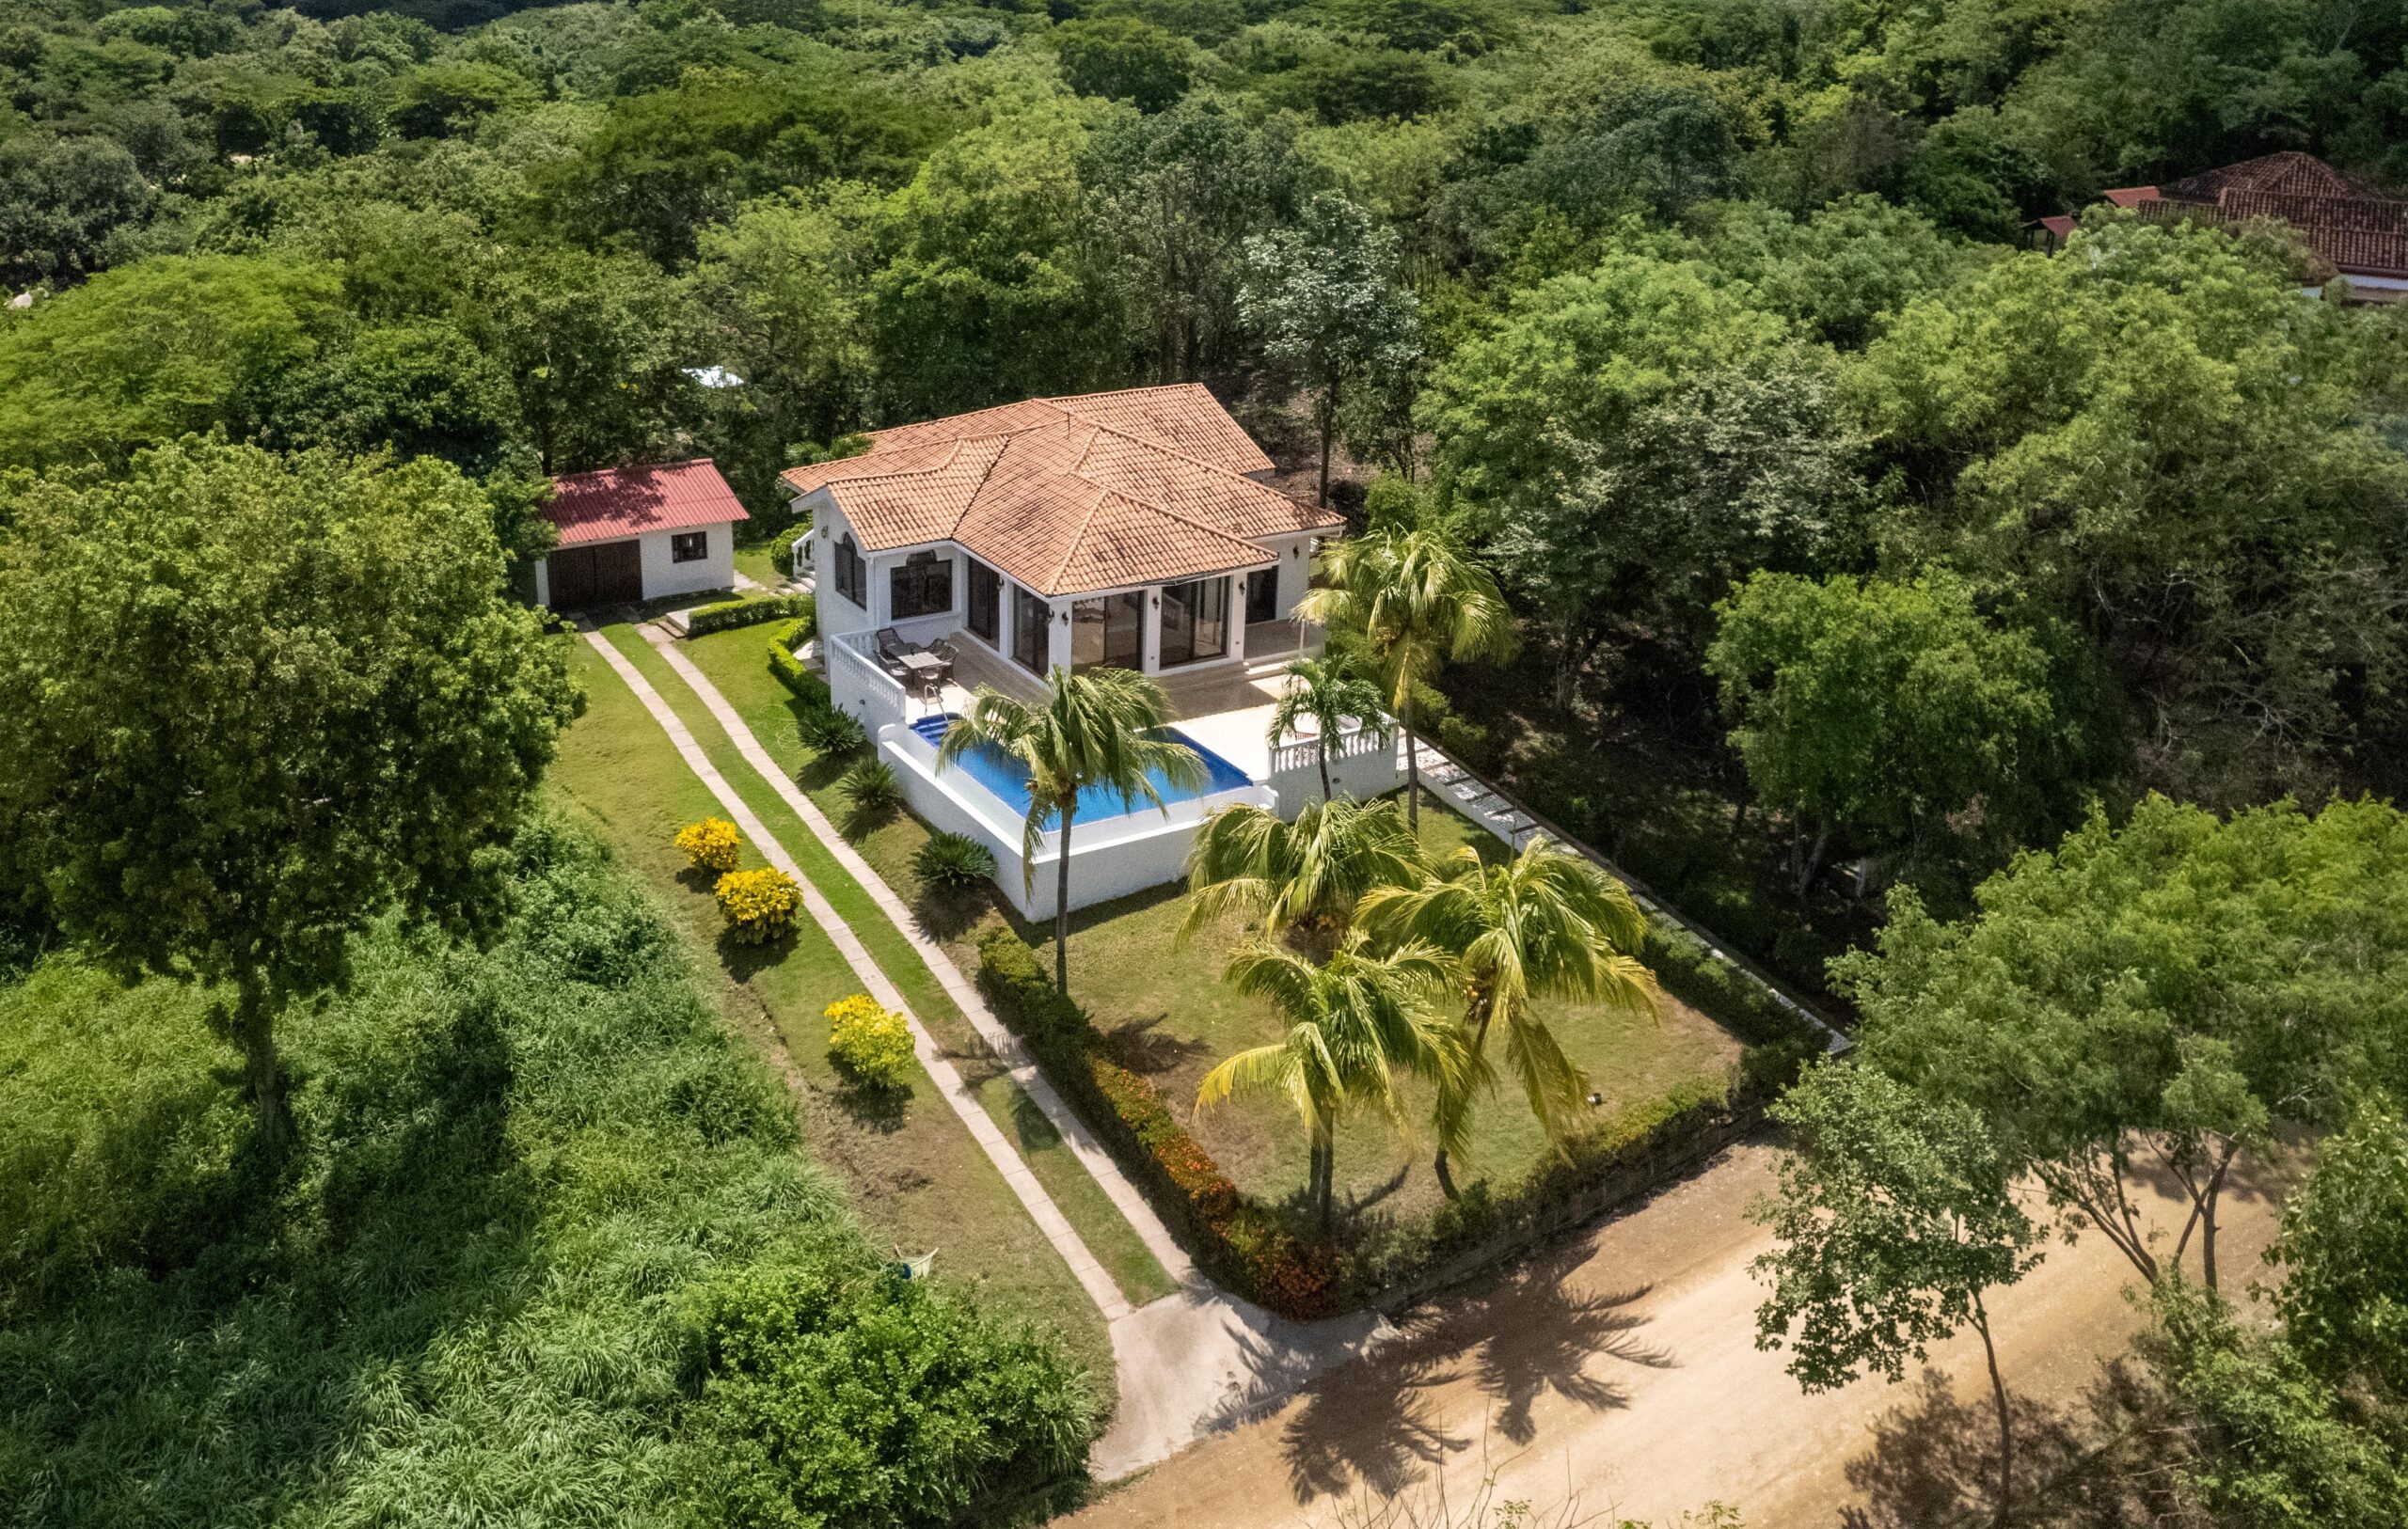 http://View%20of%20the%20drone%20in%20Casa%20Paradise%20H2%20in%20Rancho%20Santana